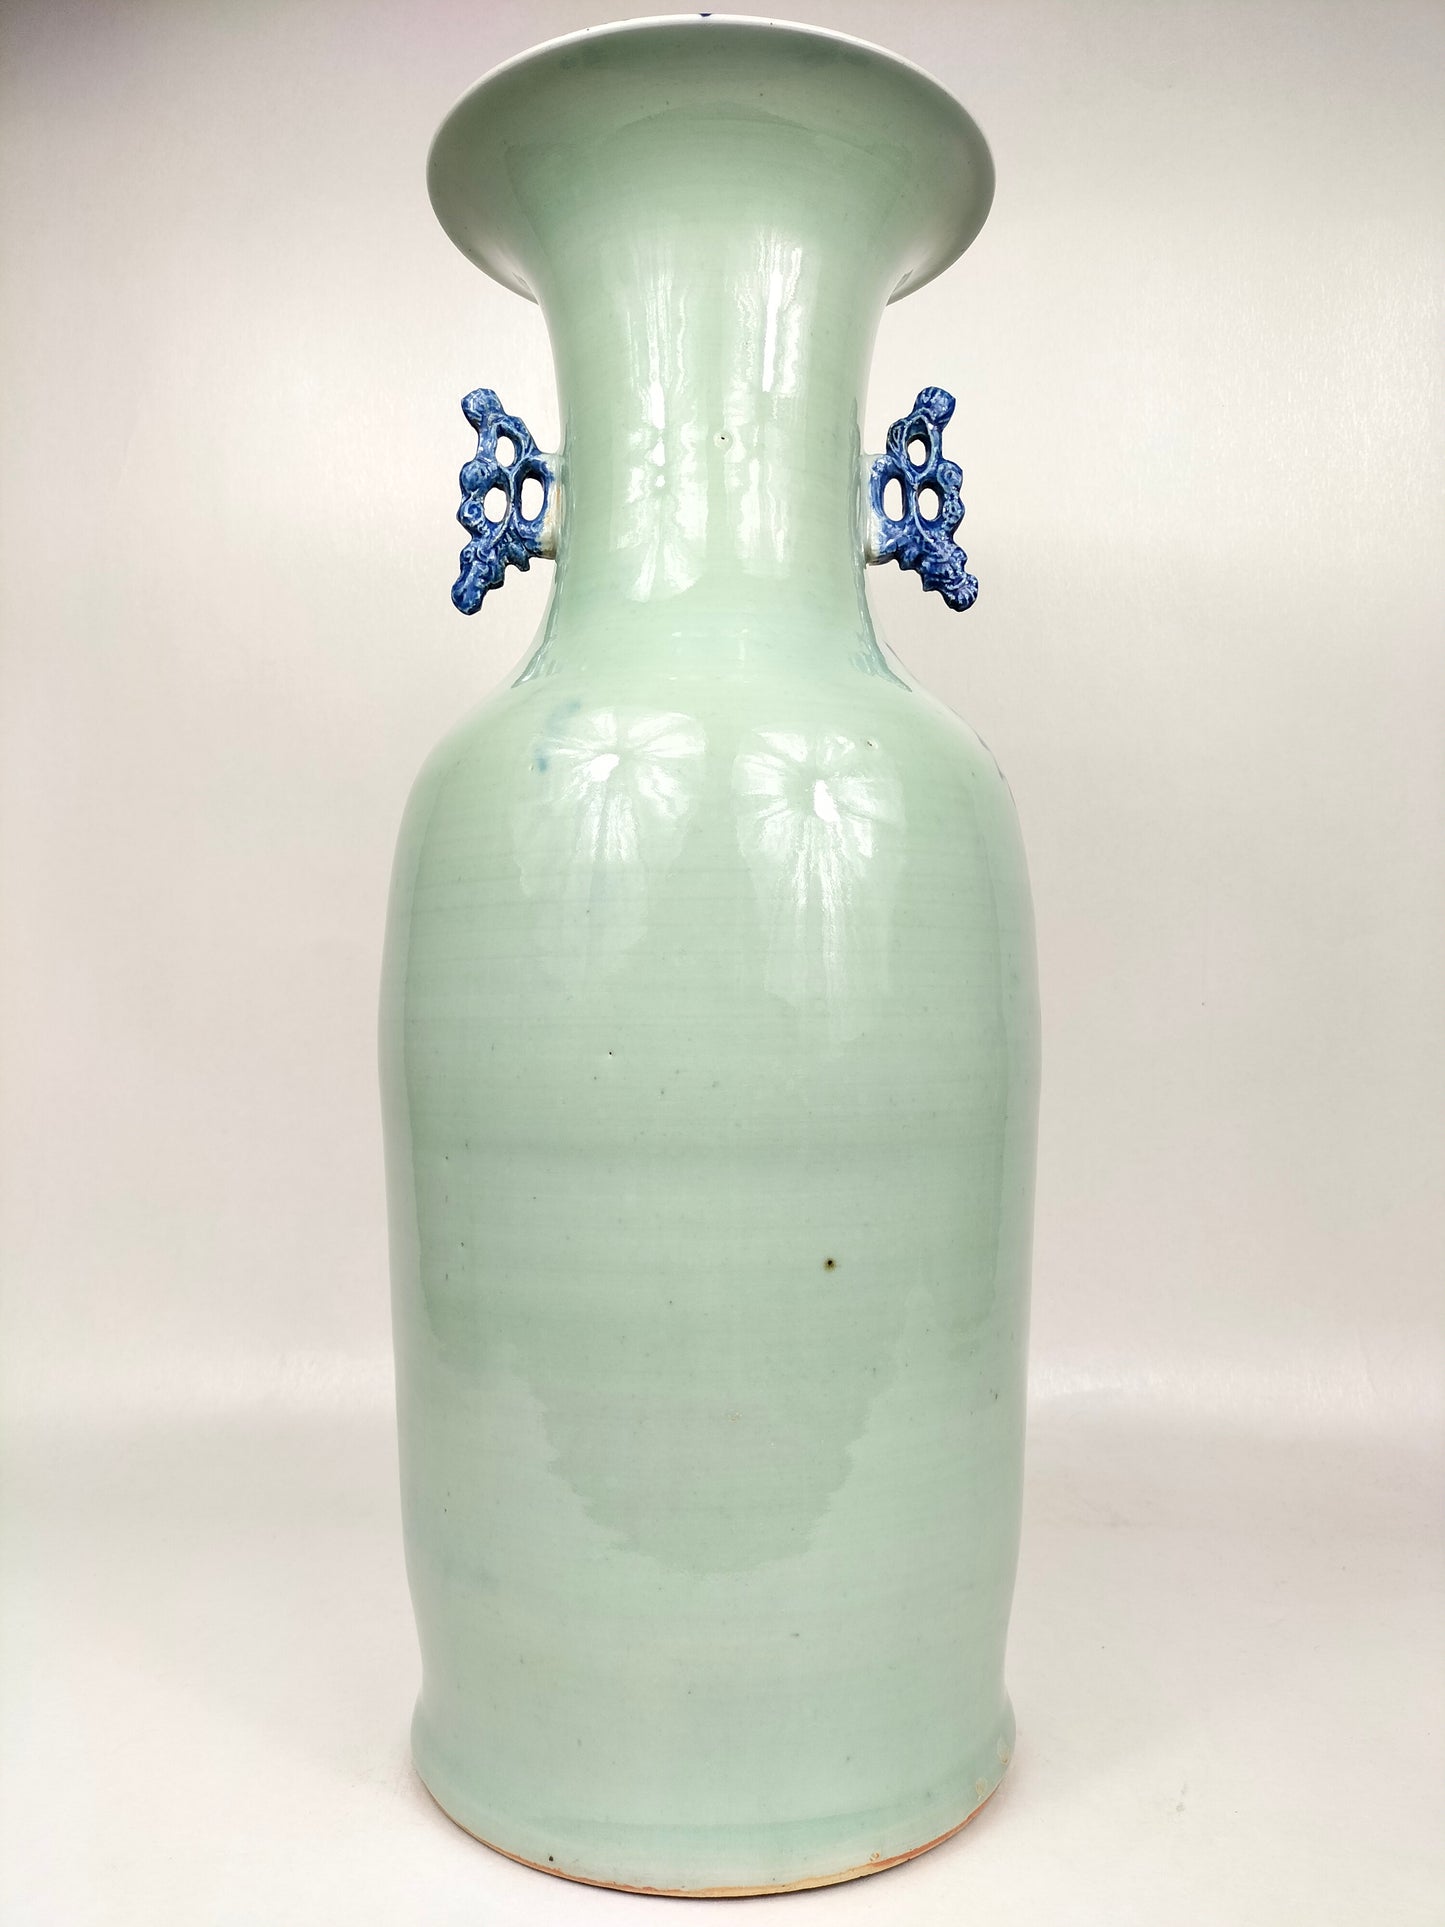 Large antique Chinese celadon vase decorated with deer and flowers // Qing Dynasty - 19th century